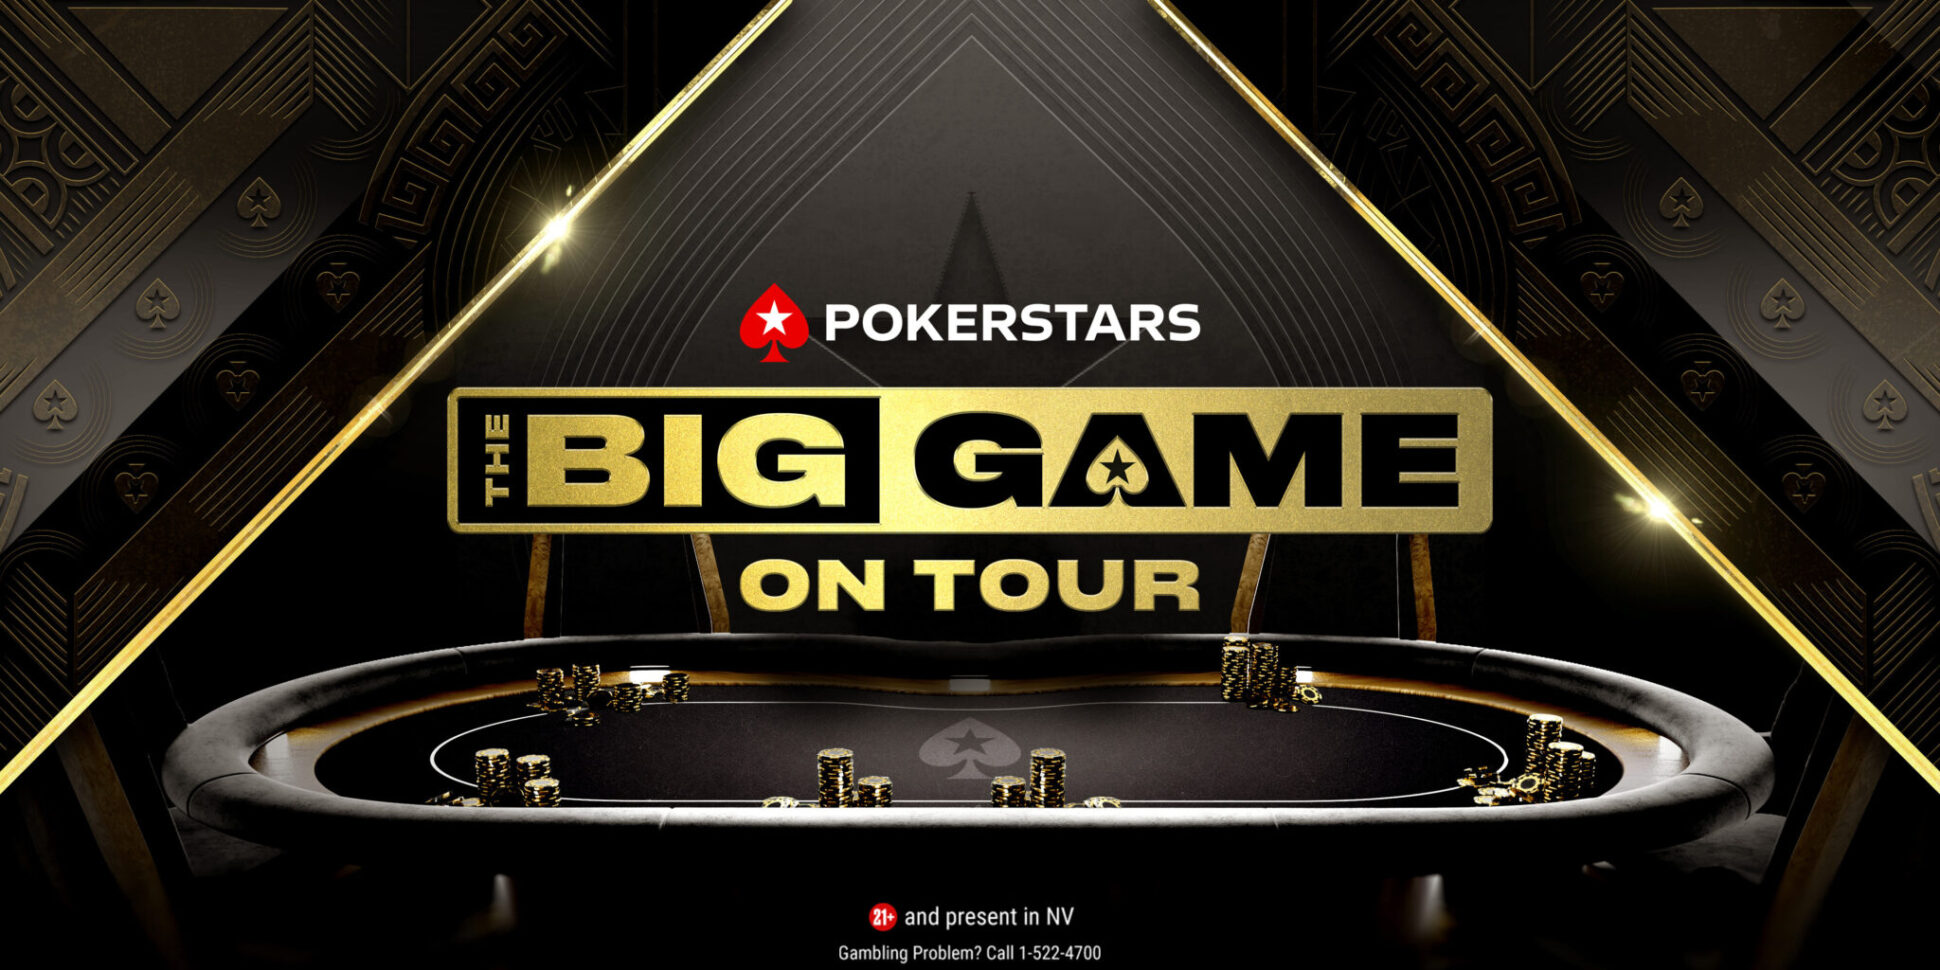 The PokerStars Big Game is back and you can become a Loose Cannon for free